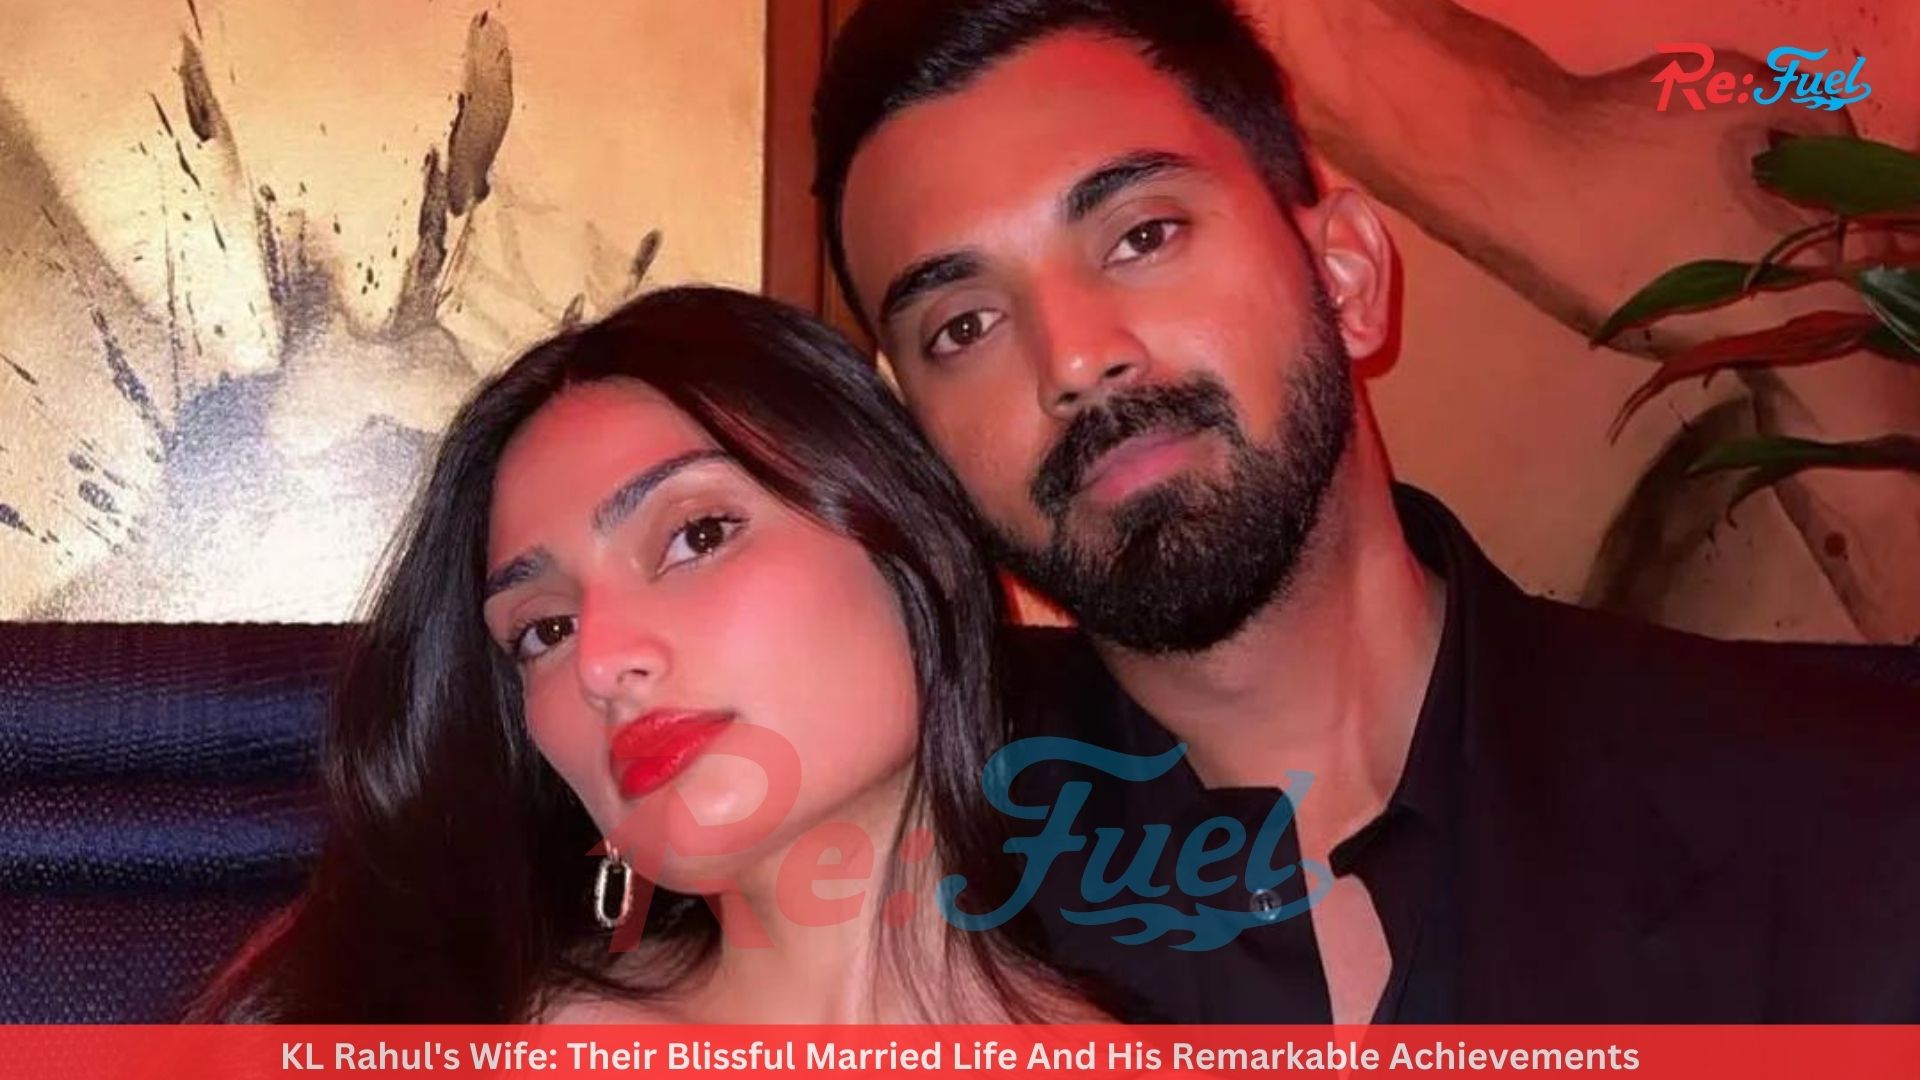 KL Rahul's Wife: Their Blissful Married Life And His Remarkable Achievements